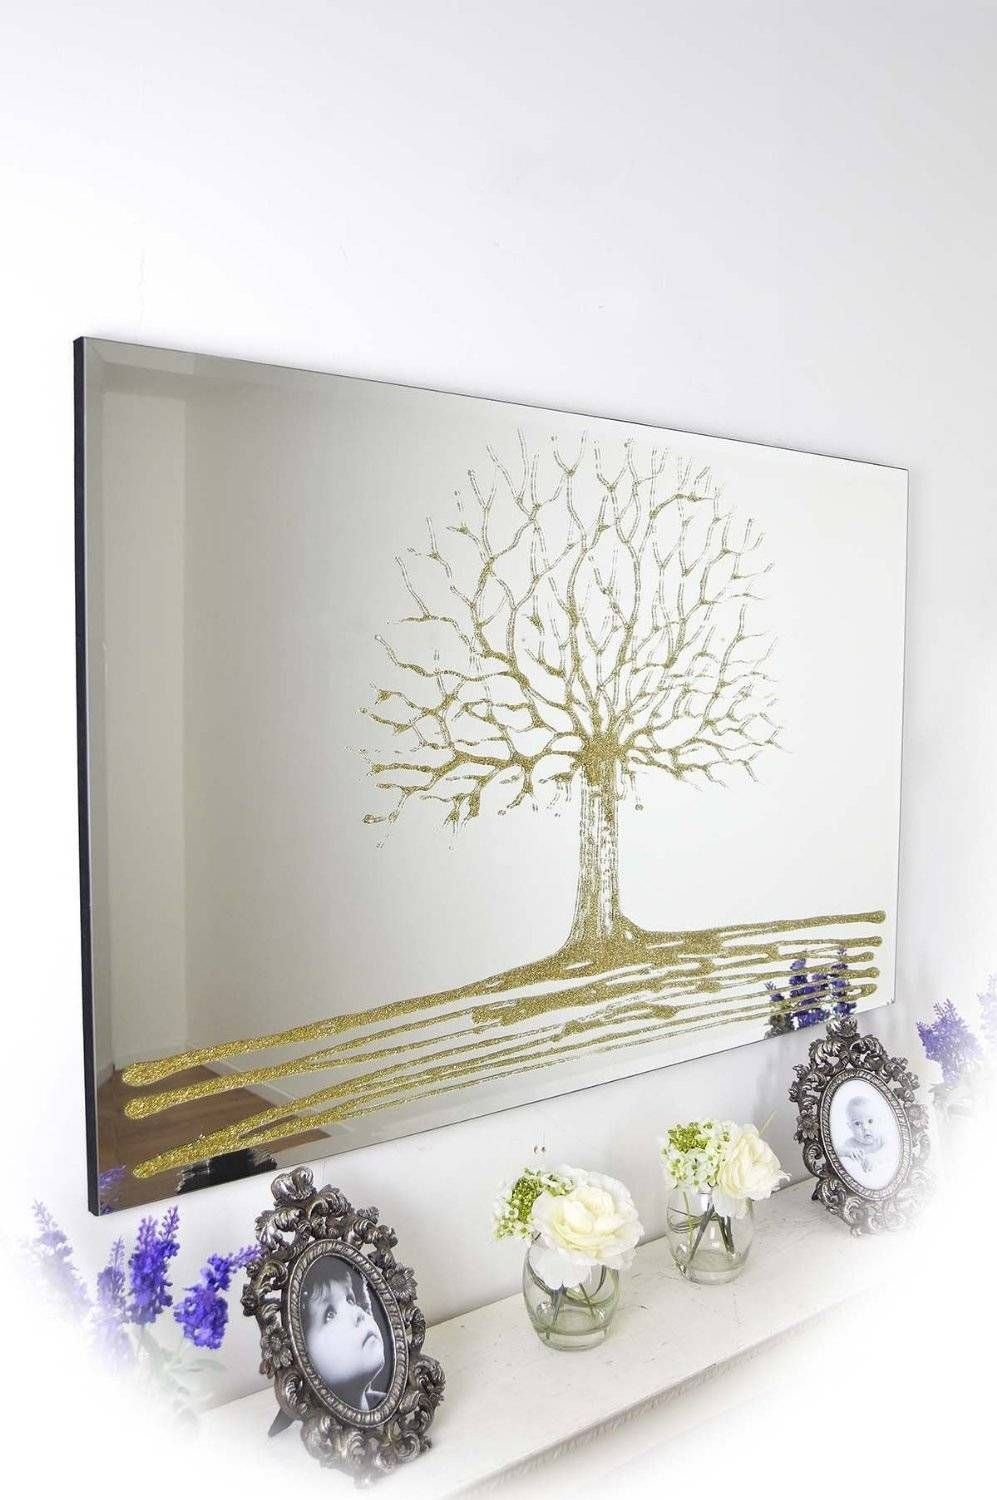 16 Ornate Mirrors For Your Home | Qosy Inside Wall Mirrors With Crystals (View 21 of 25)